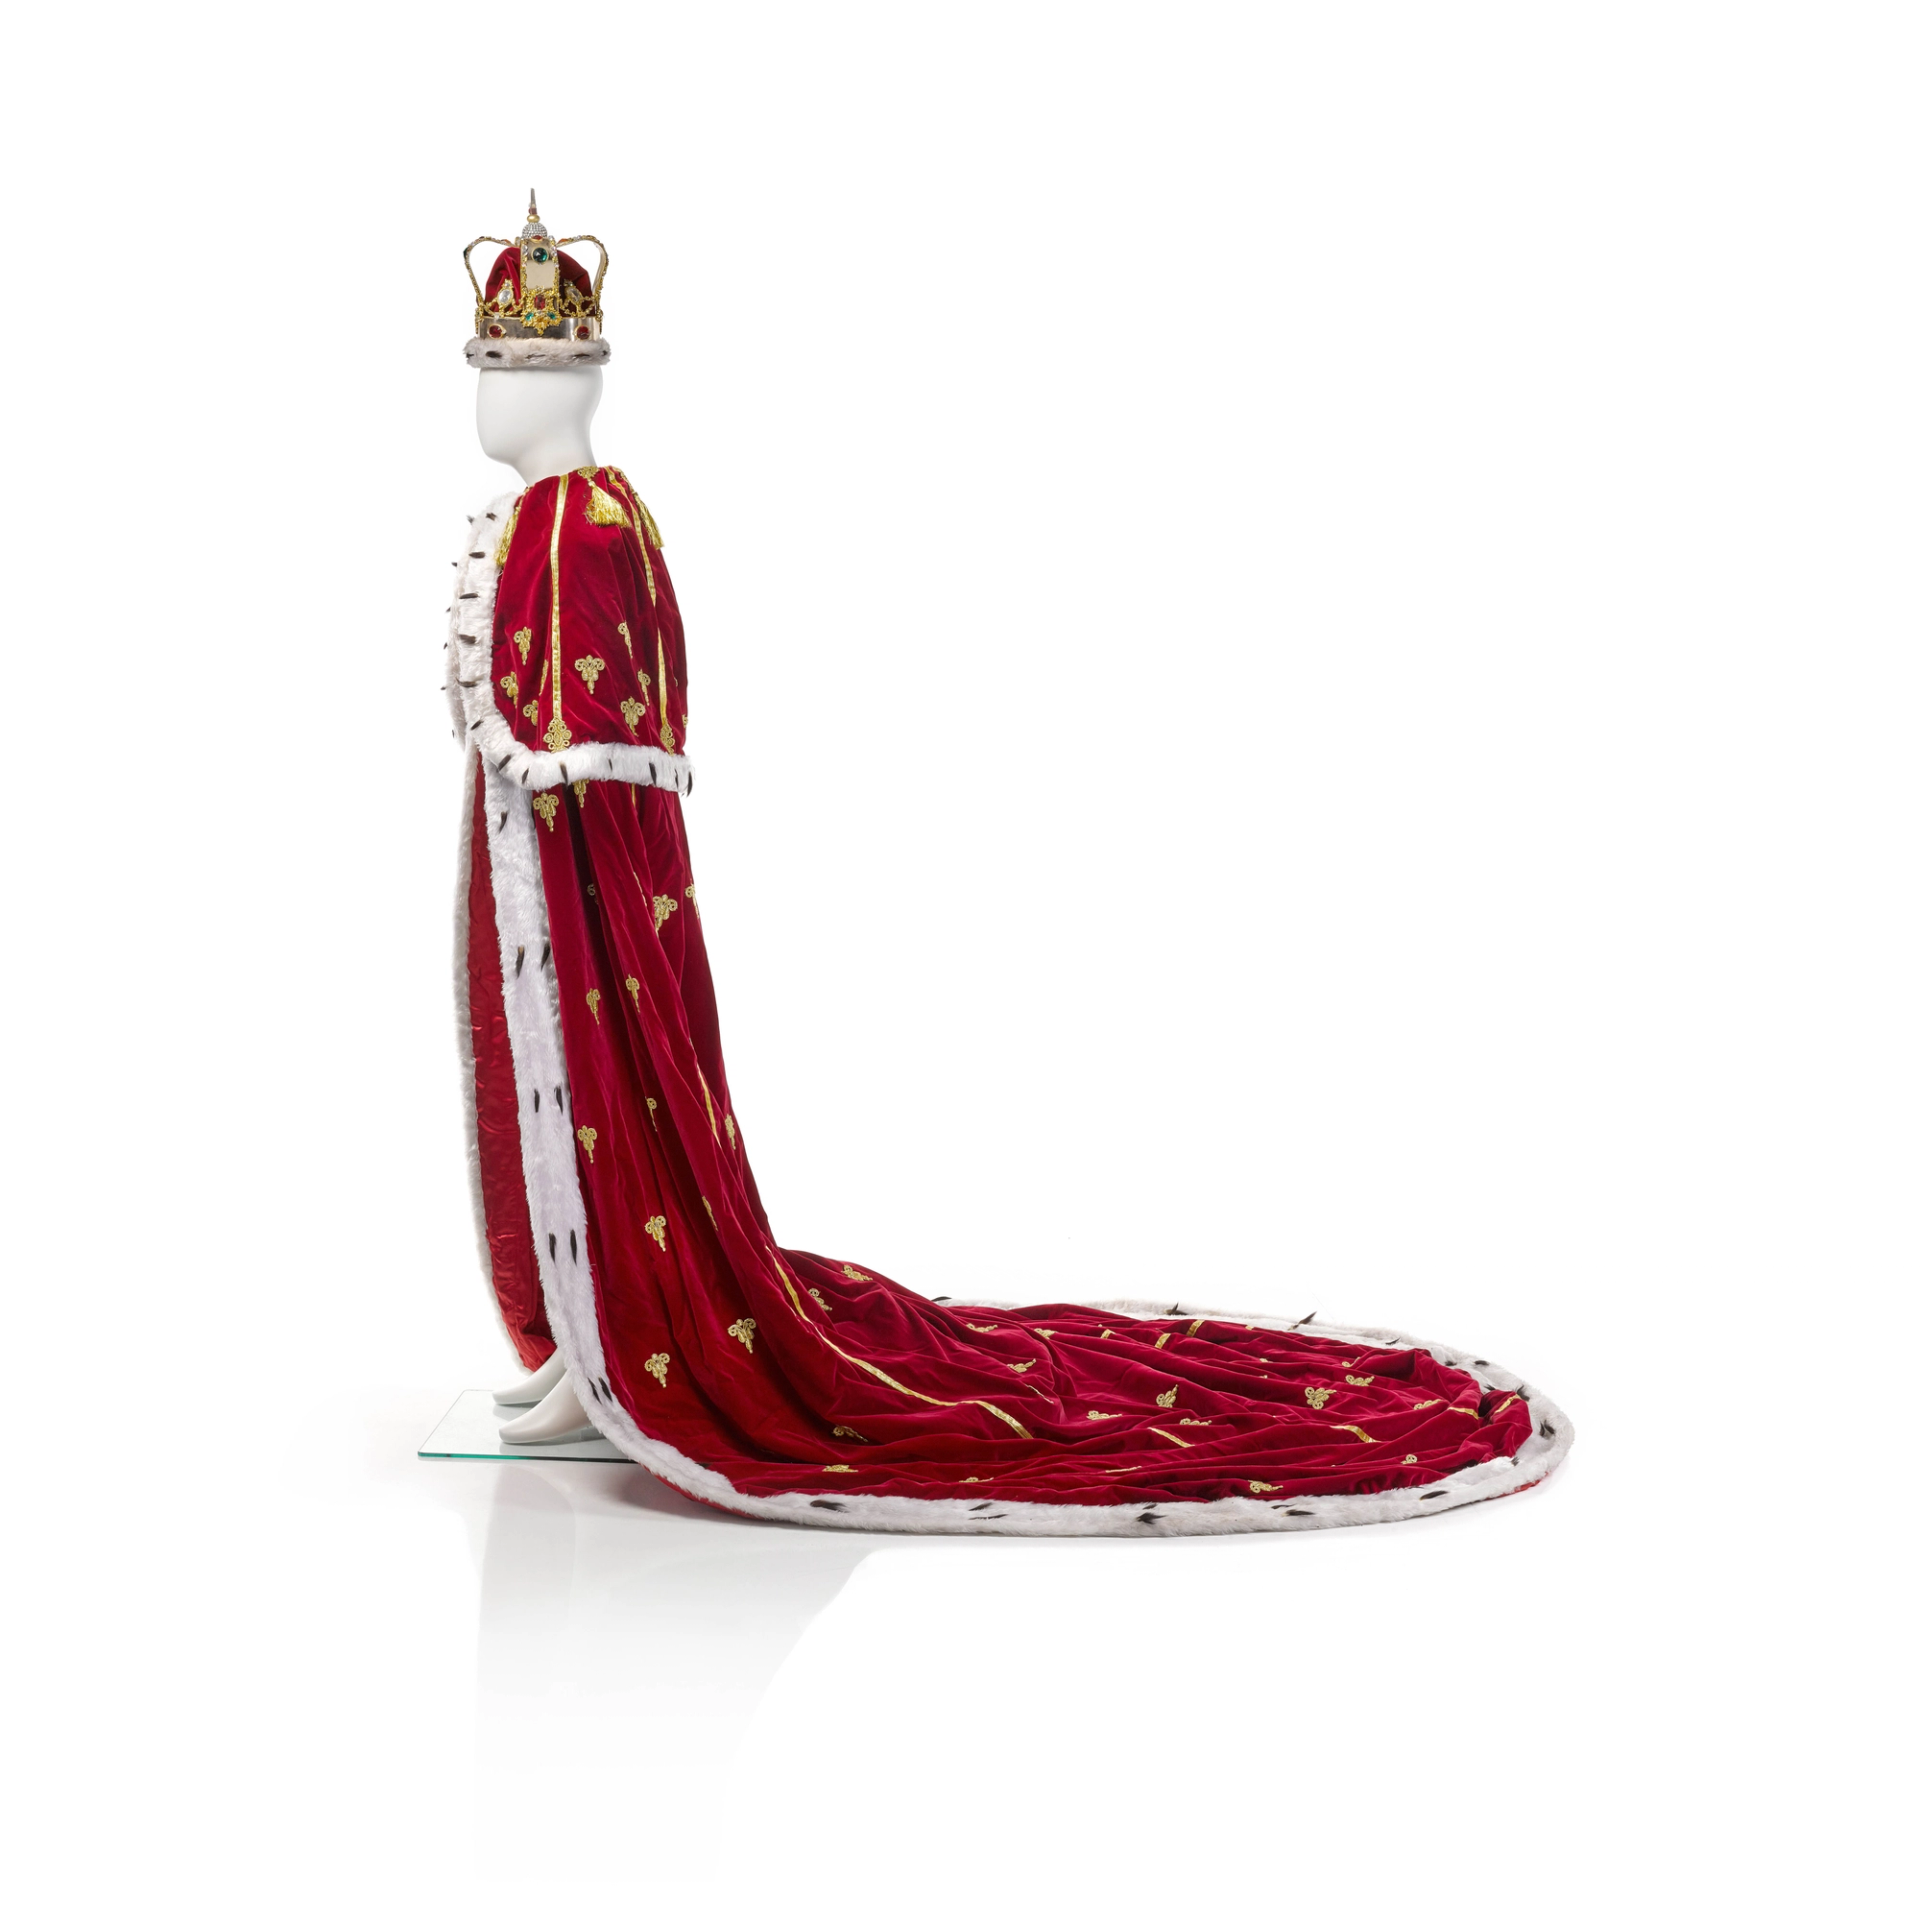 An image of a mannequin wearing Freddie Mercury's gold crown and red velvet cloak, against a white background.